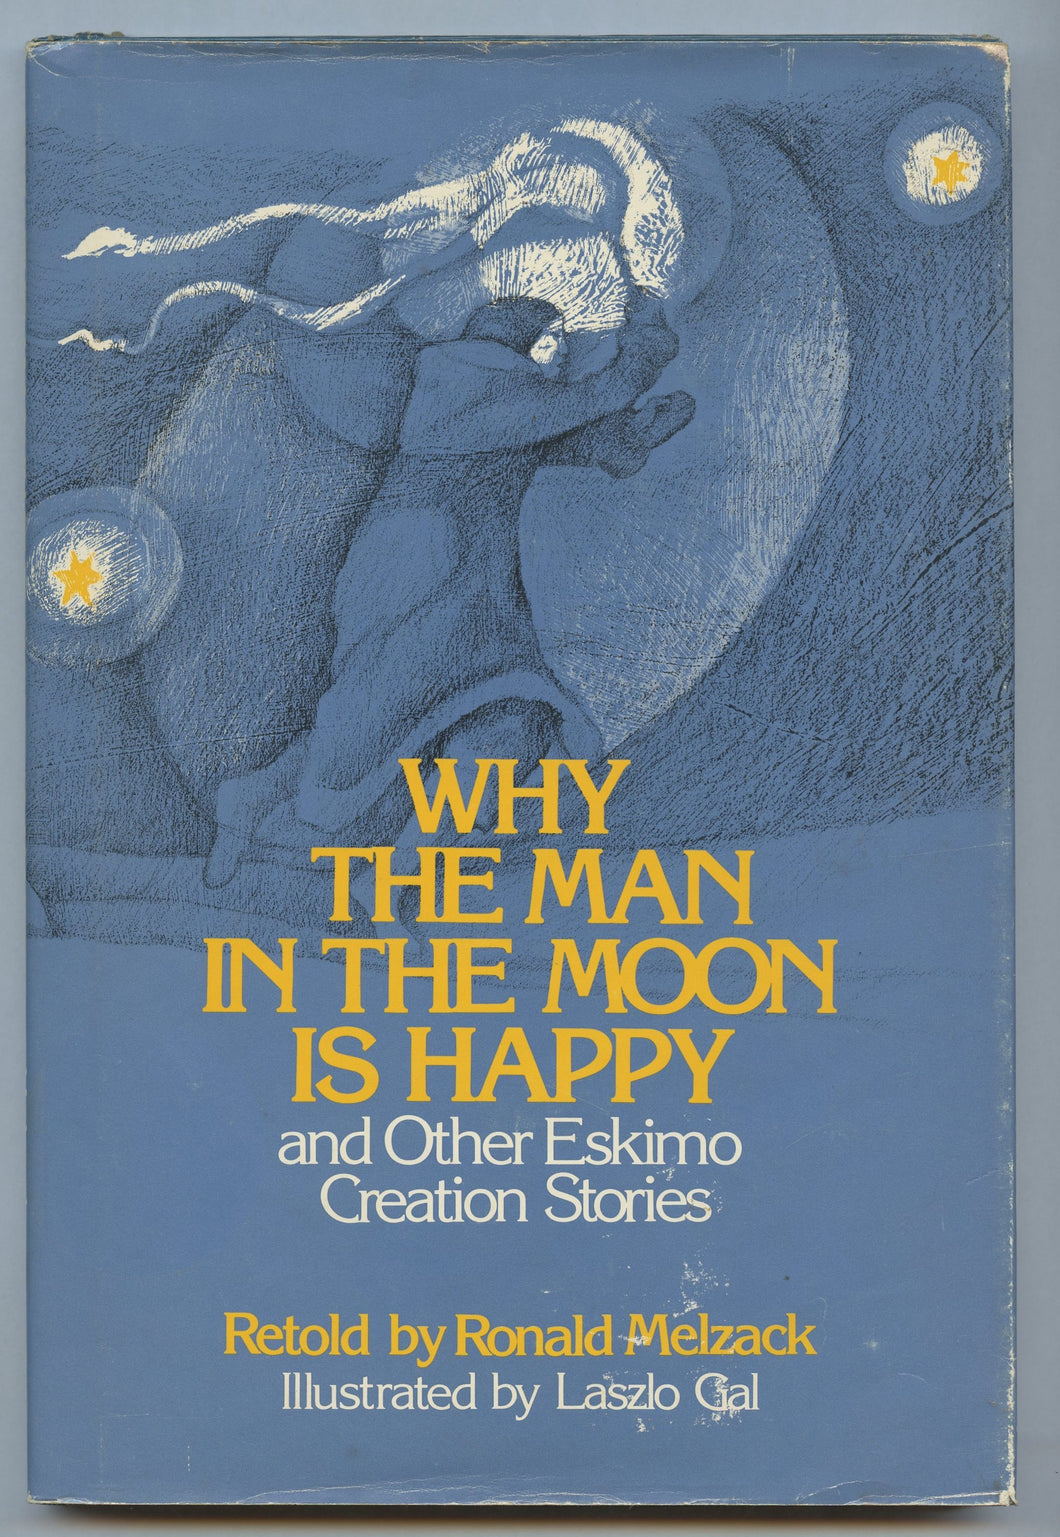 Why The Man in the Moon is Happy and Other Eskimo Creation Stories